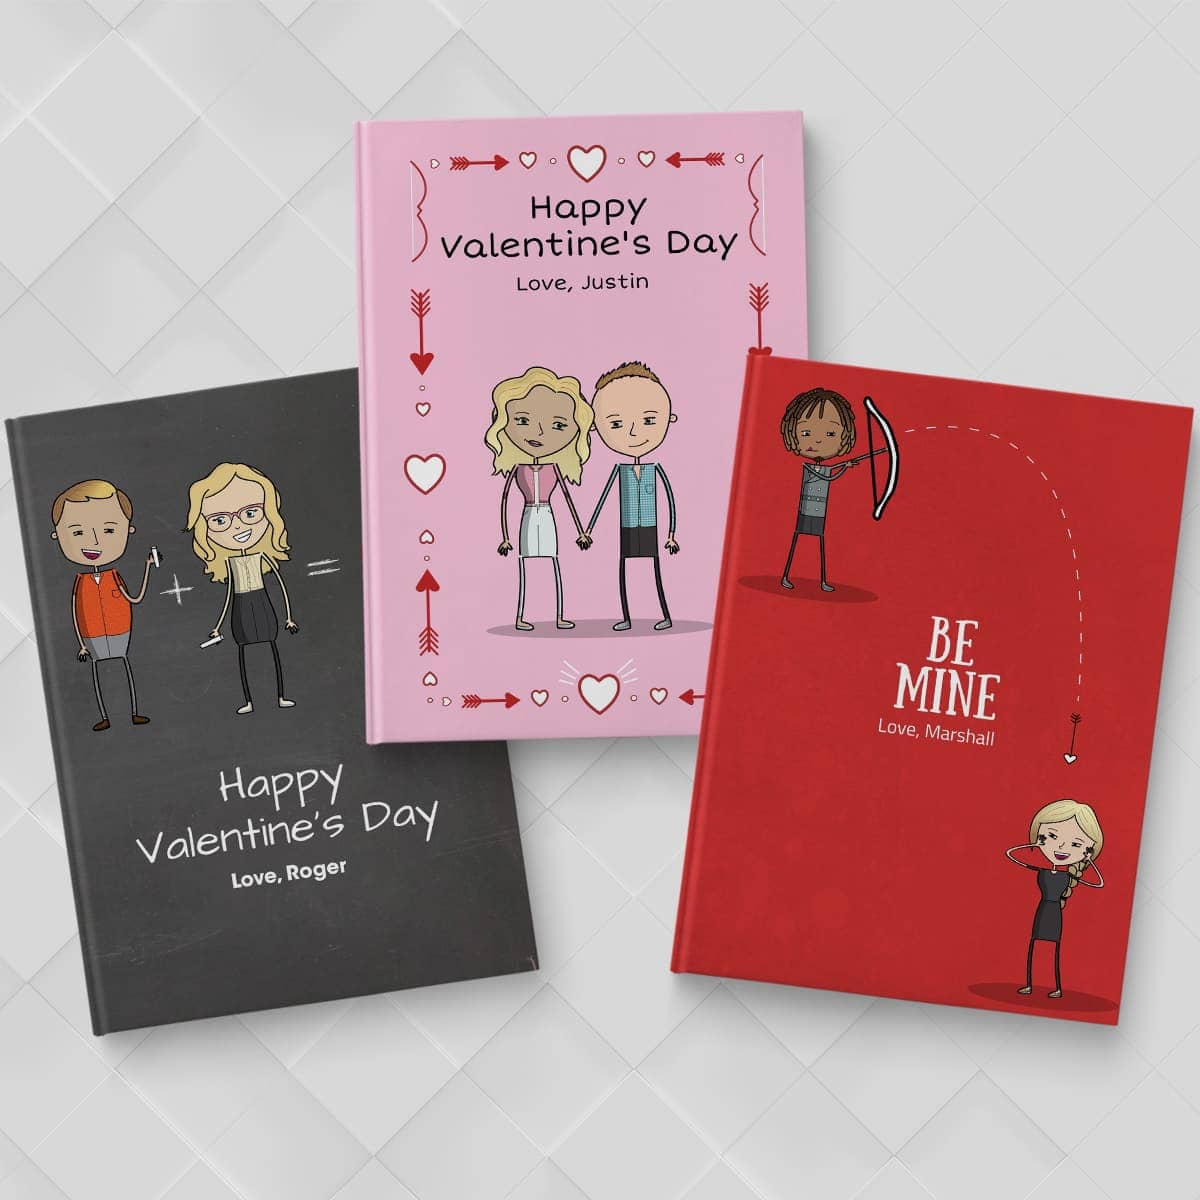 Valentine's Day Gifts by LoveBook | The Personalized Gift Book That Says Why You Love Someone | LoveBook Online - 1